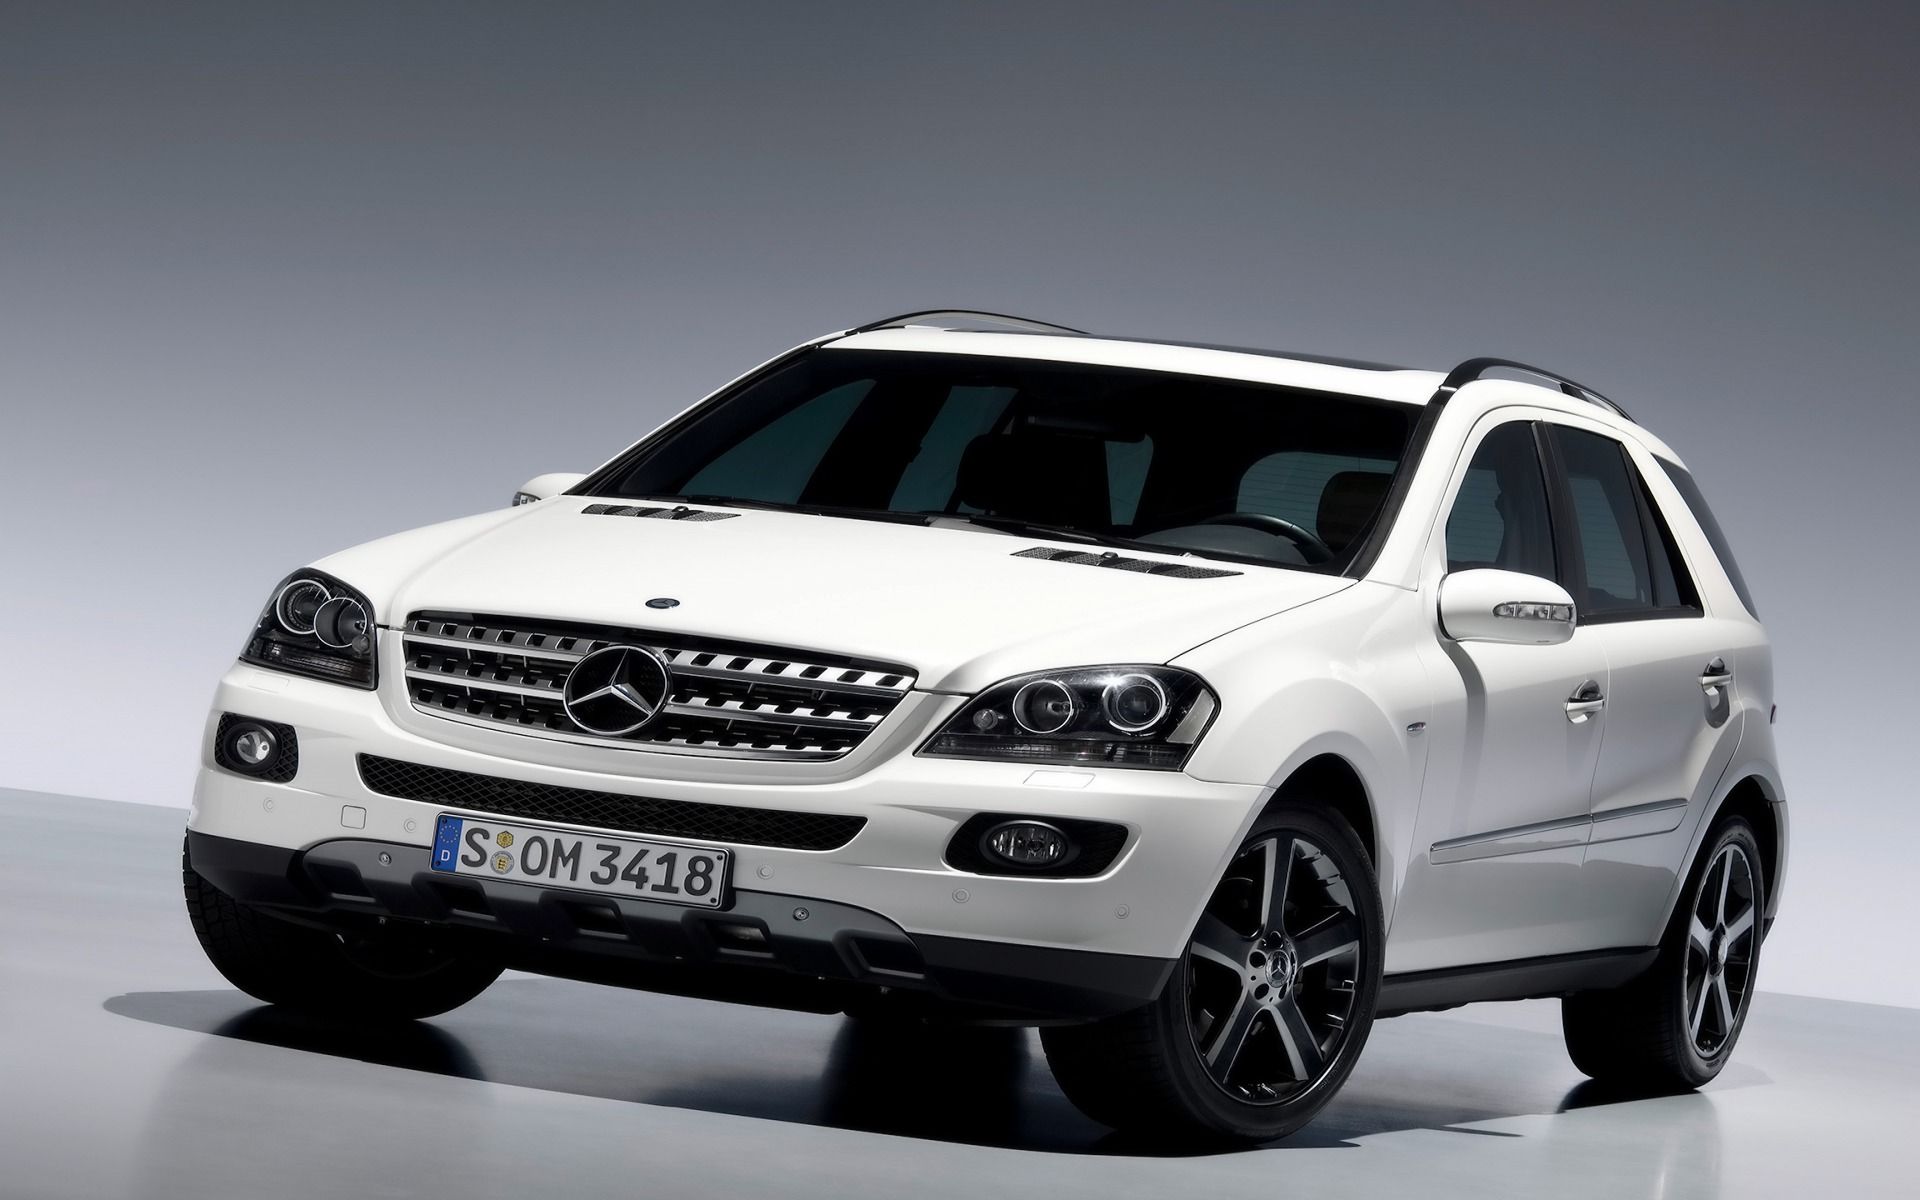 Mercedes Benz M Class Edition 10 Wallpaper Mercedes Cars Wallpaper in jpg format for free download